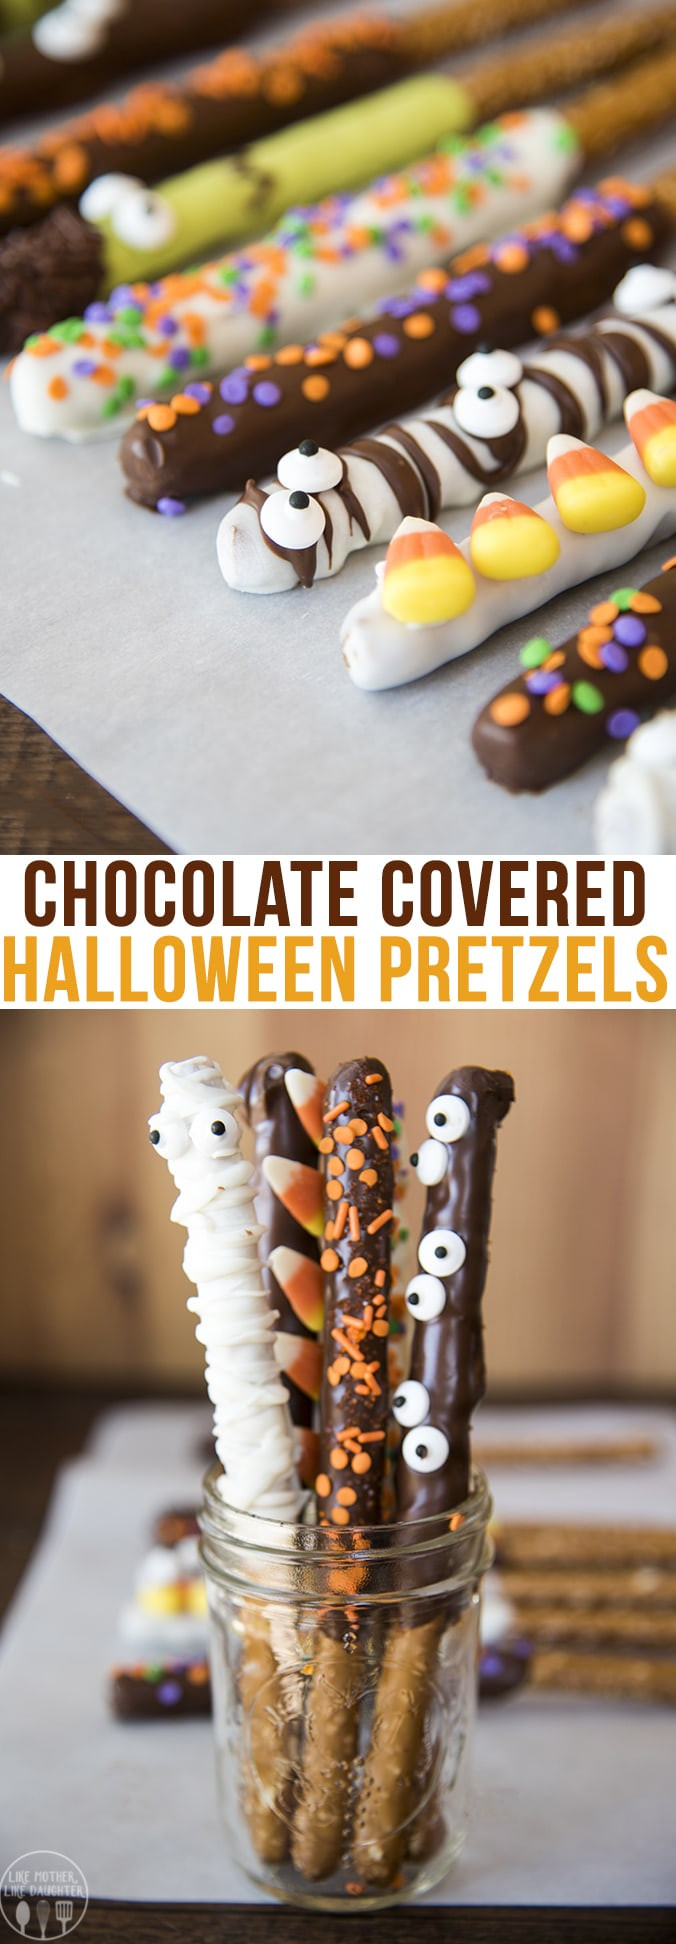 Chocolate Dipped Pretzels For Halloween
 Chocolate Covered Halloween Pretzels – Like Mother Like